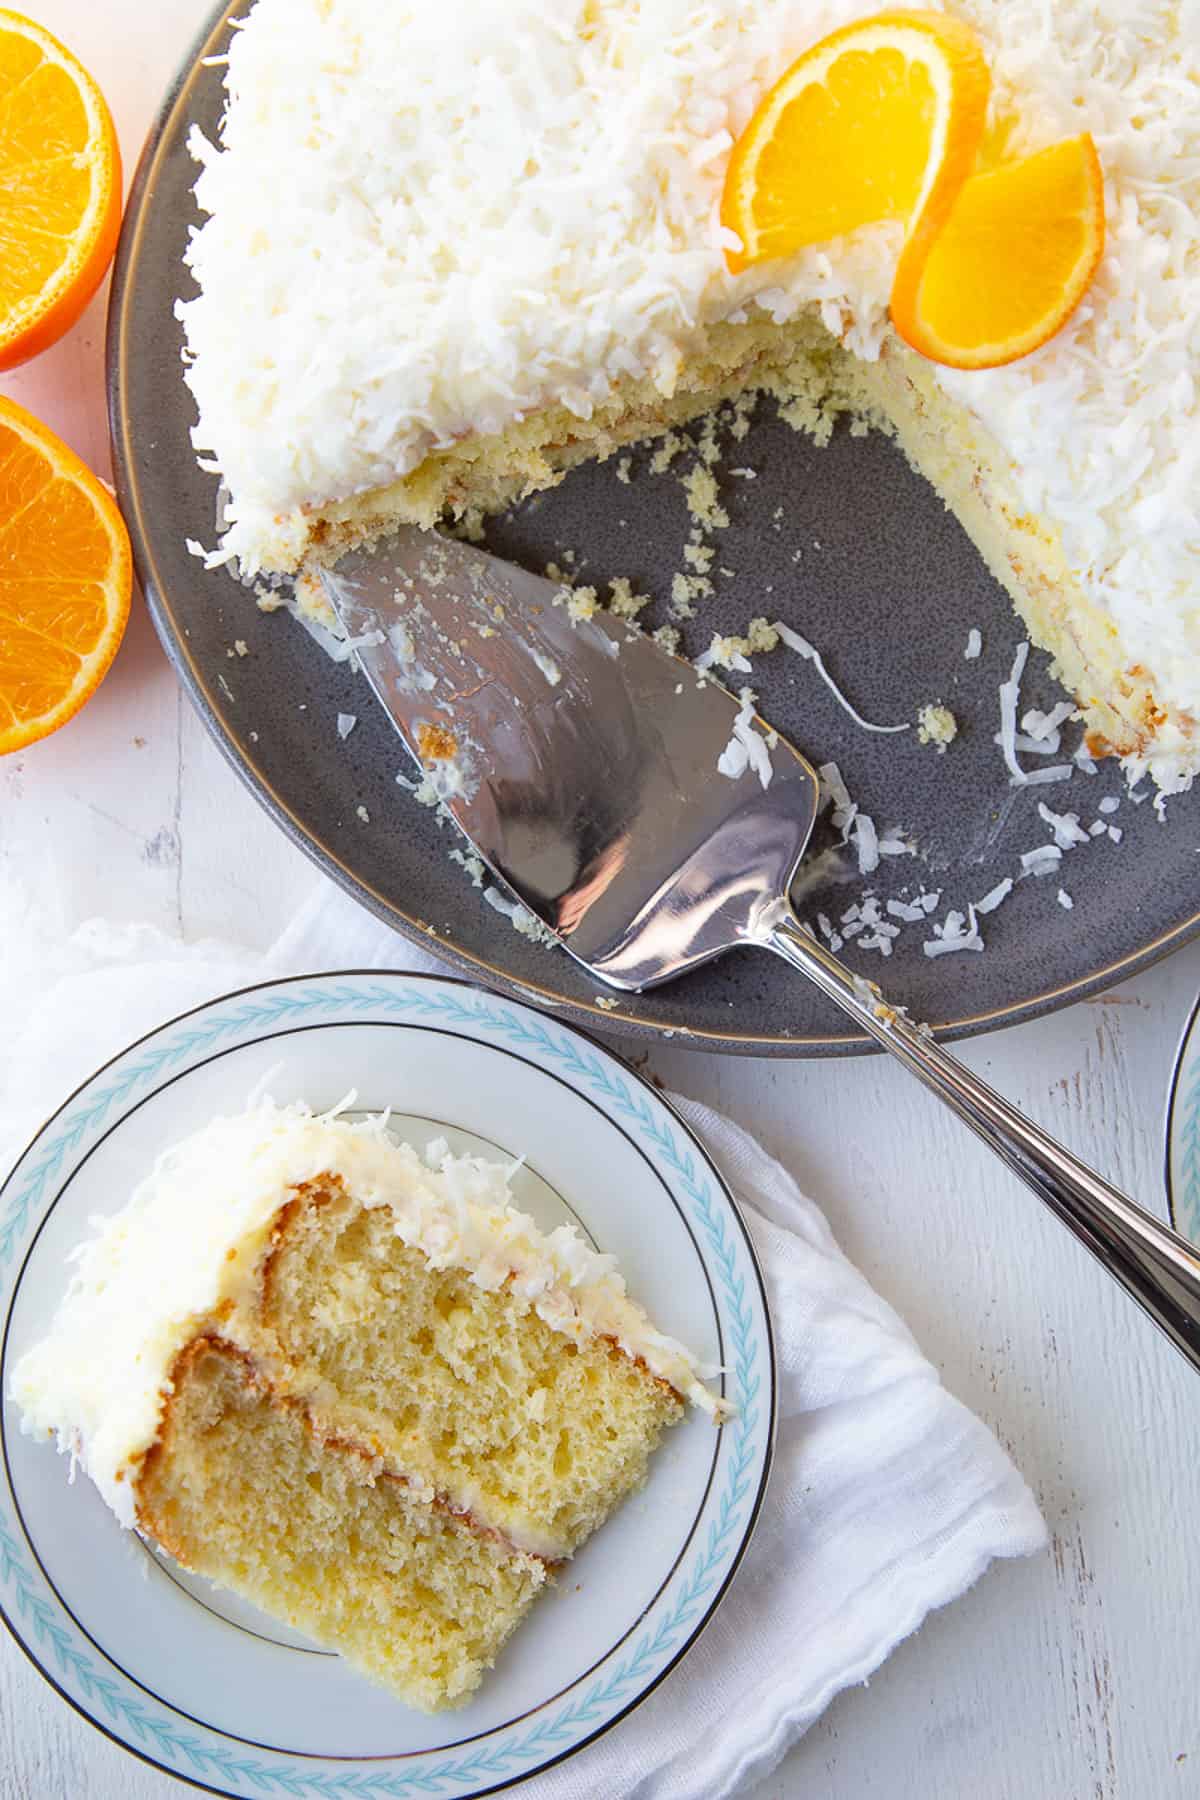 slice of orange layer cake on a blue and white plate next to a whole orange cake with orange peel garnish on a gray plate.